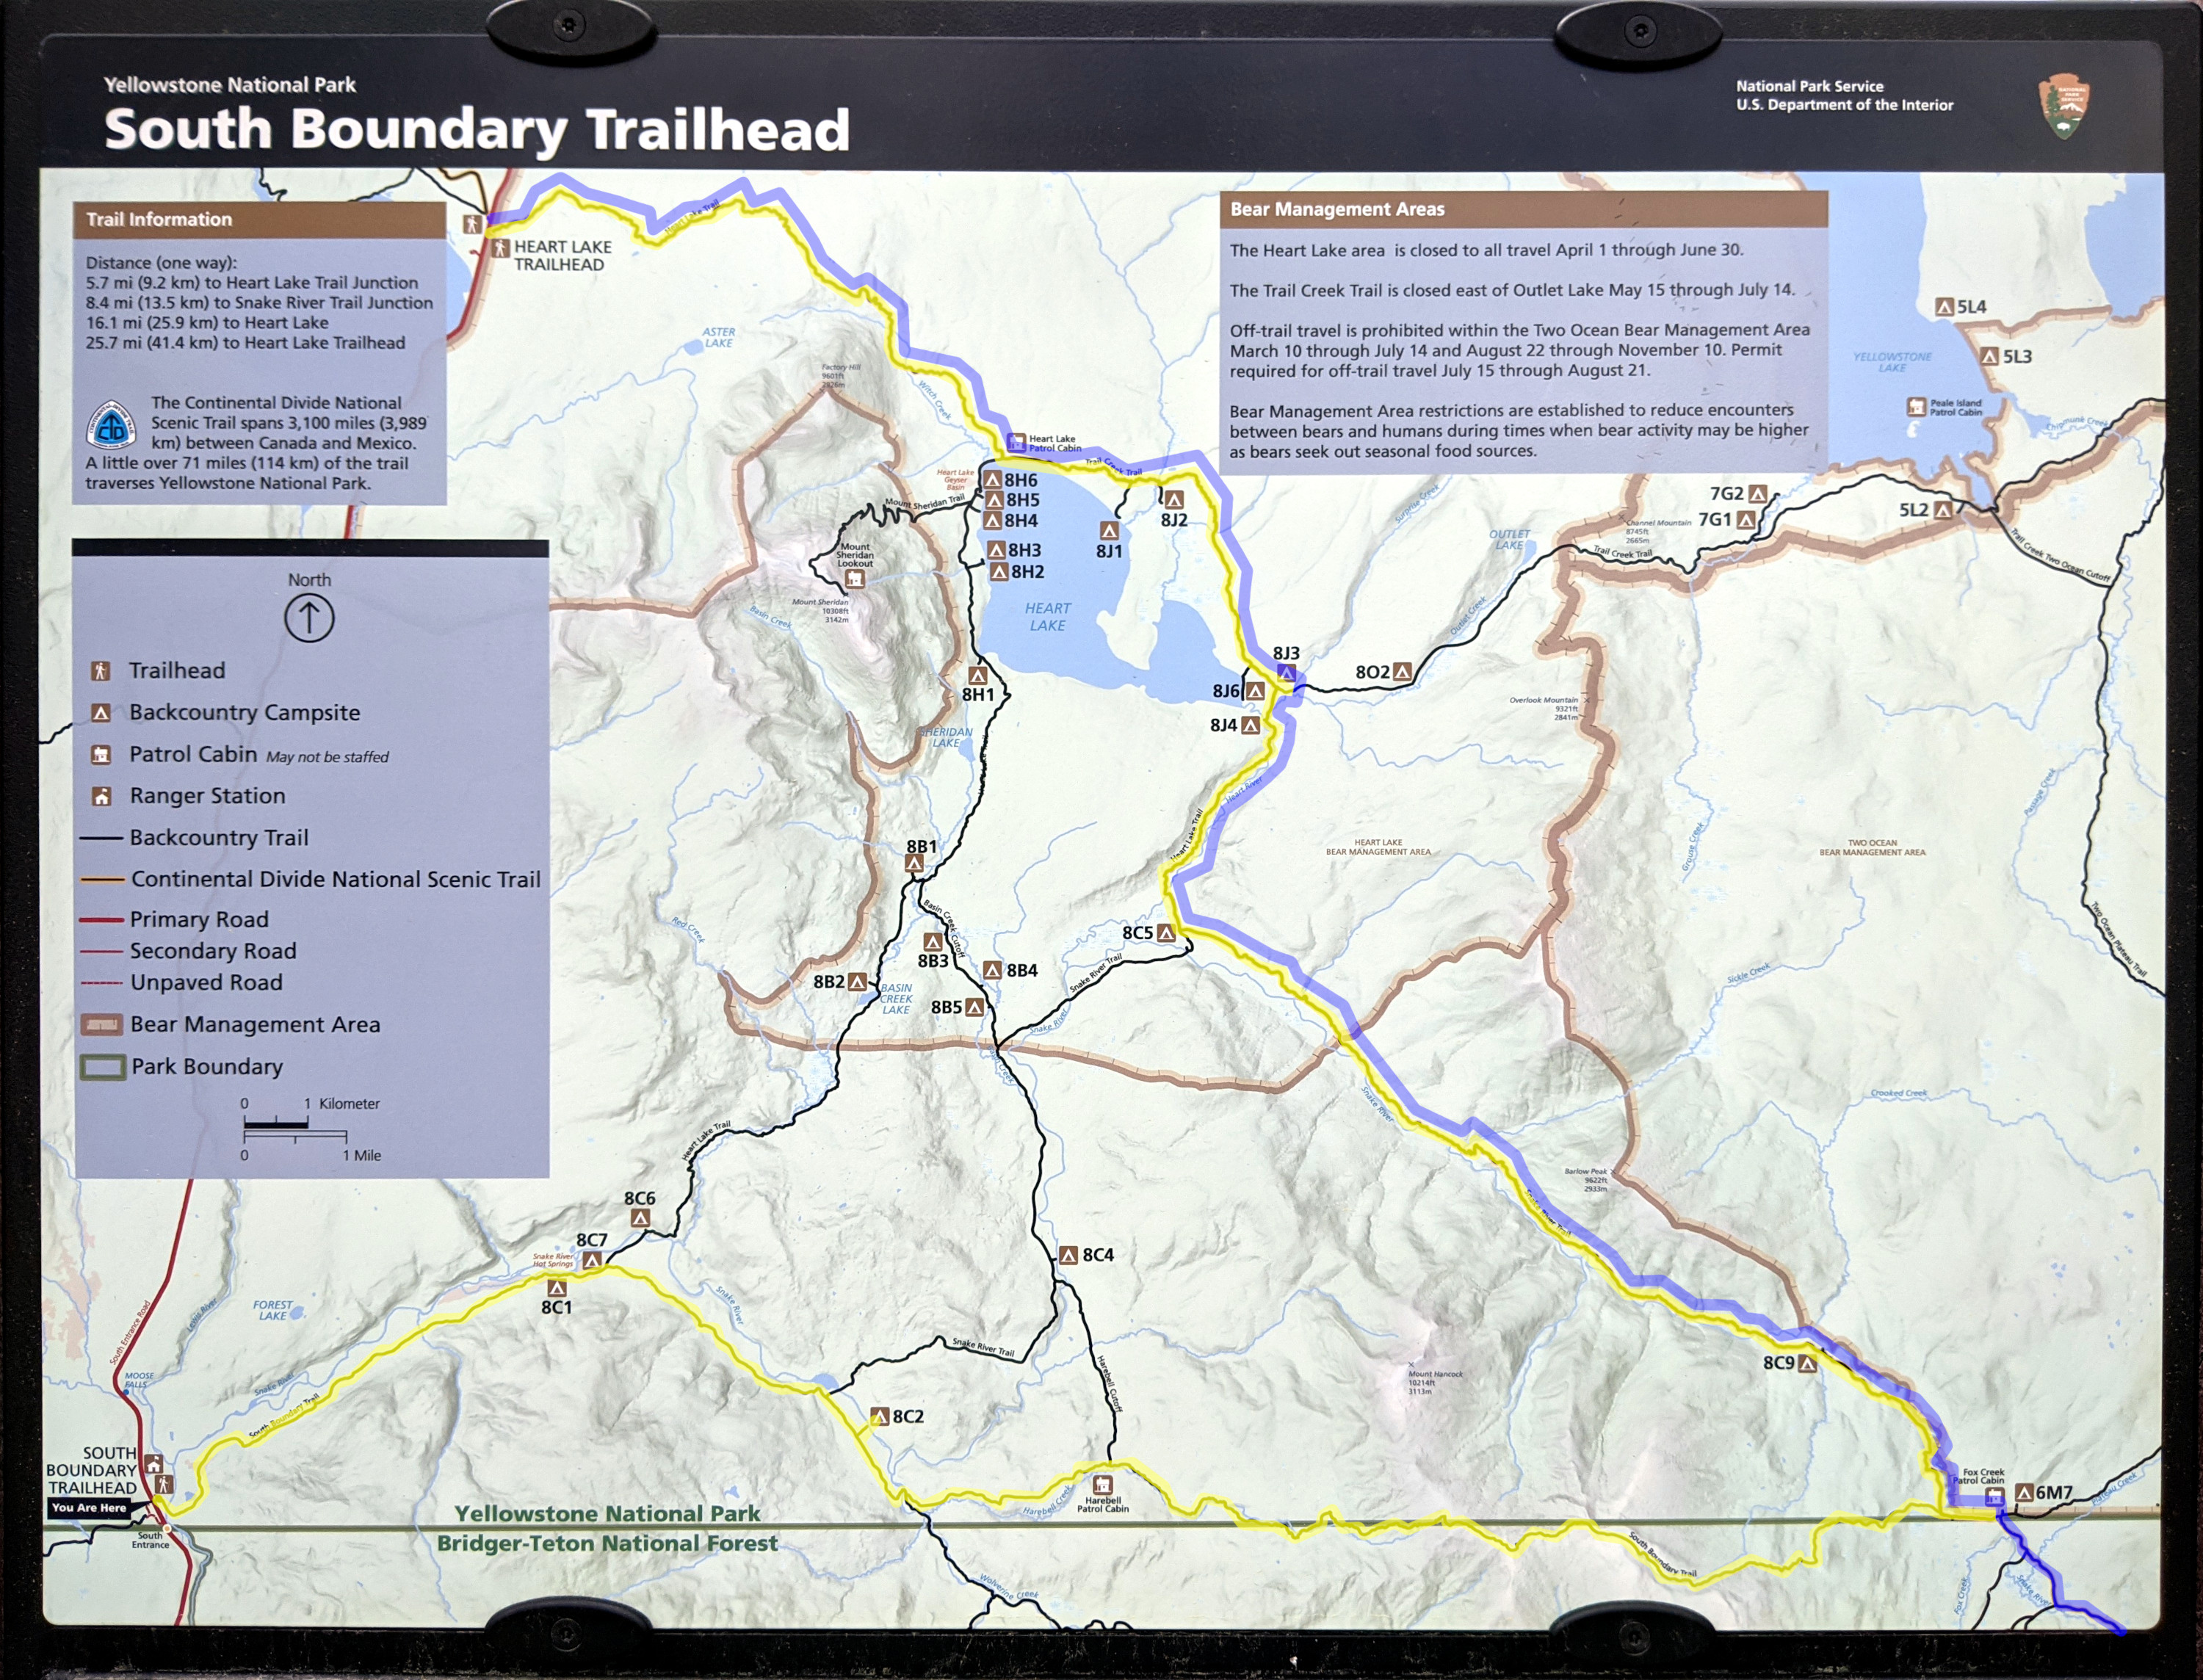 Annotated copy of Yellowstone National Park South Boundary Trailhead Map